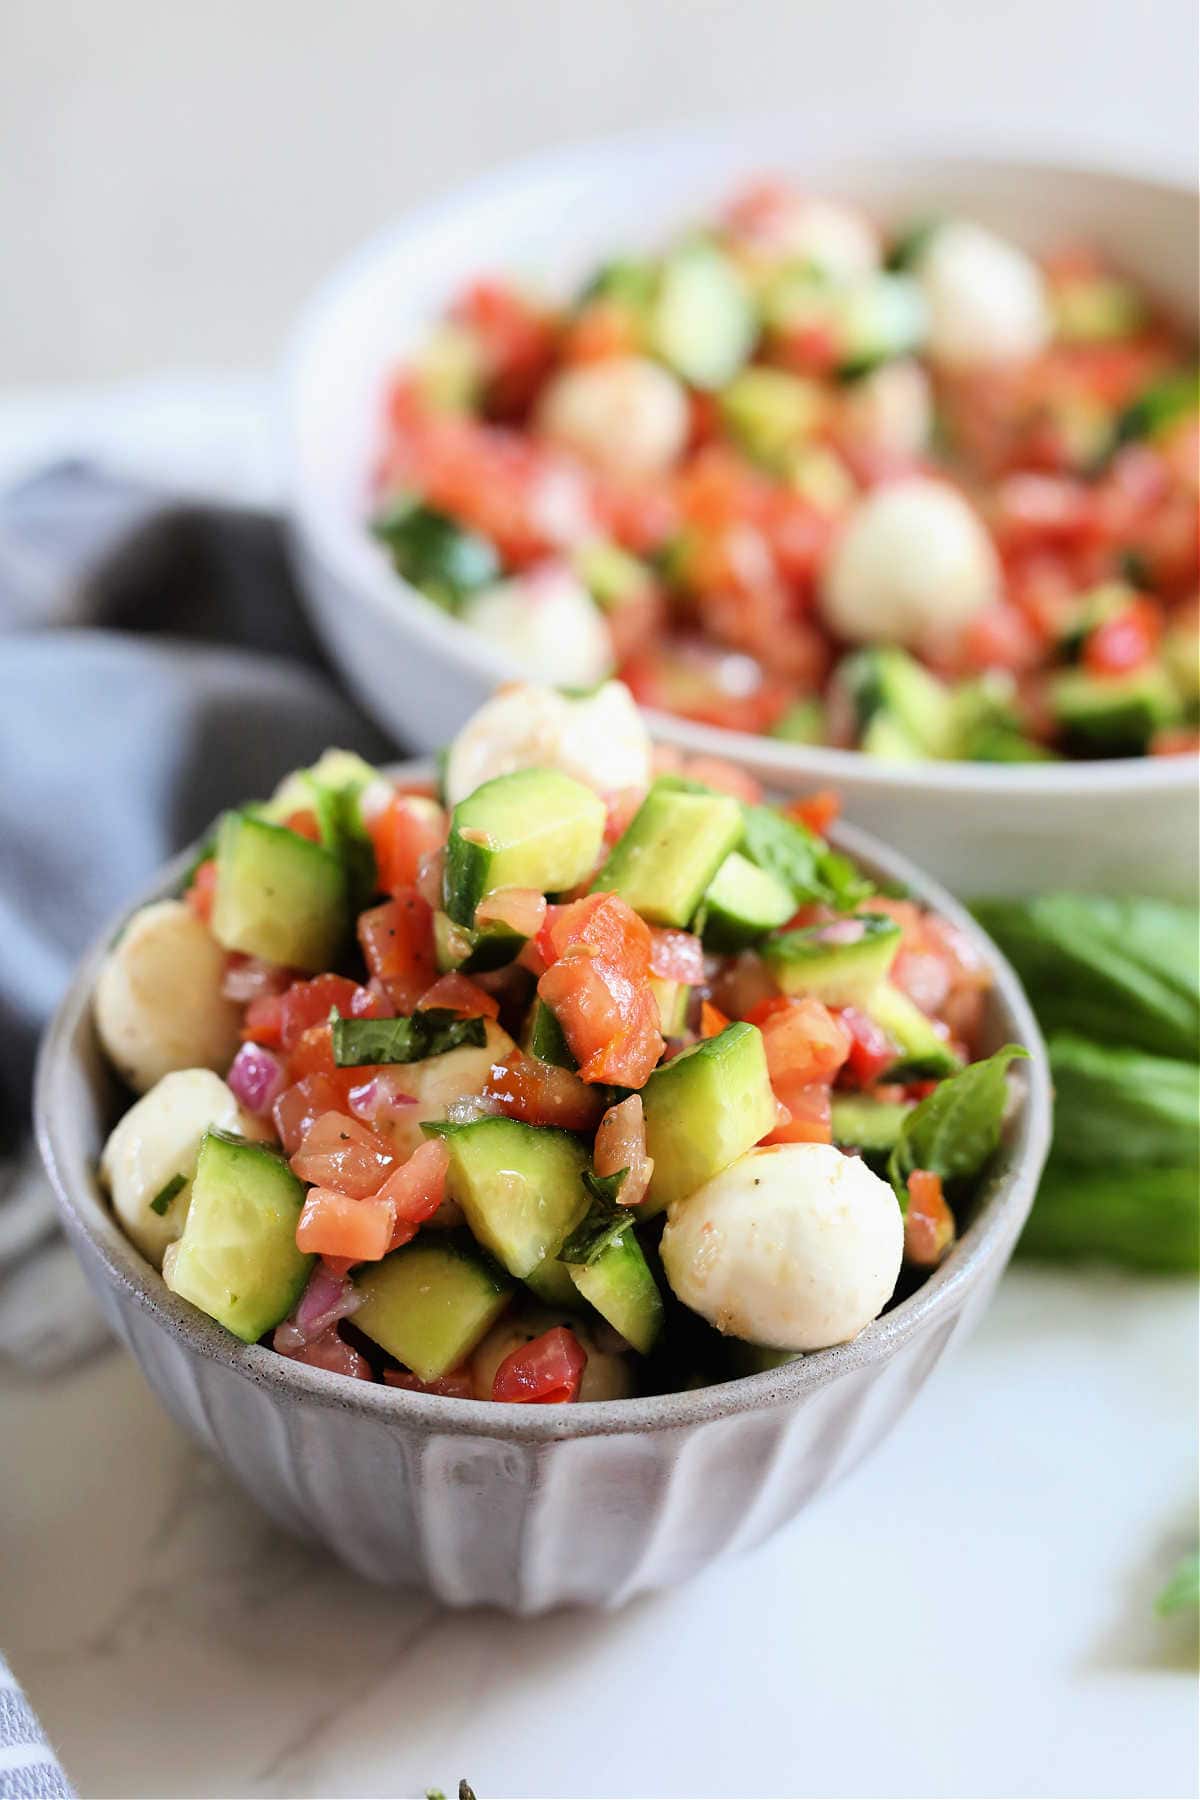 Bowl of tomato cucumber mozzarella salad with red wine vinaigrette dressing in a bowl.